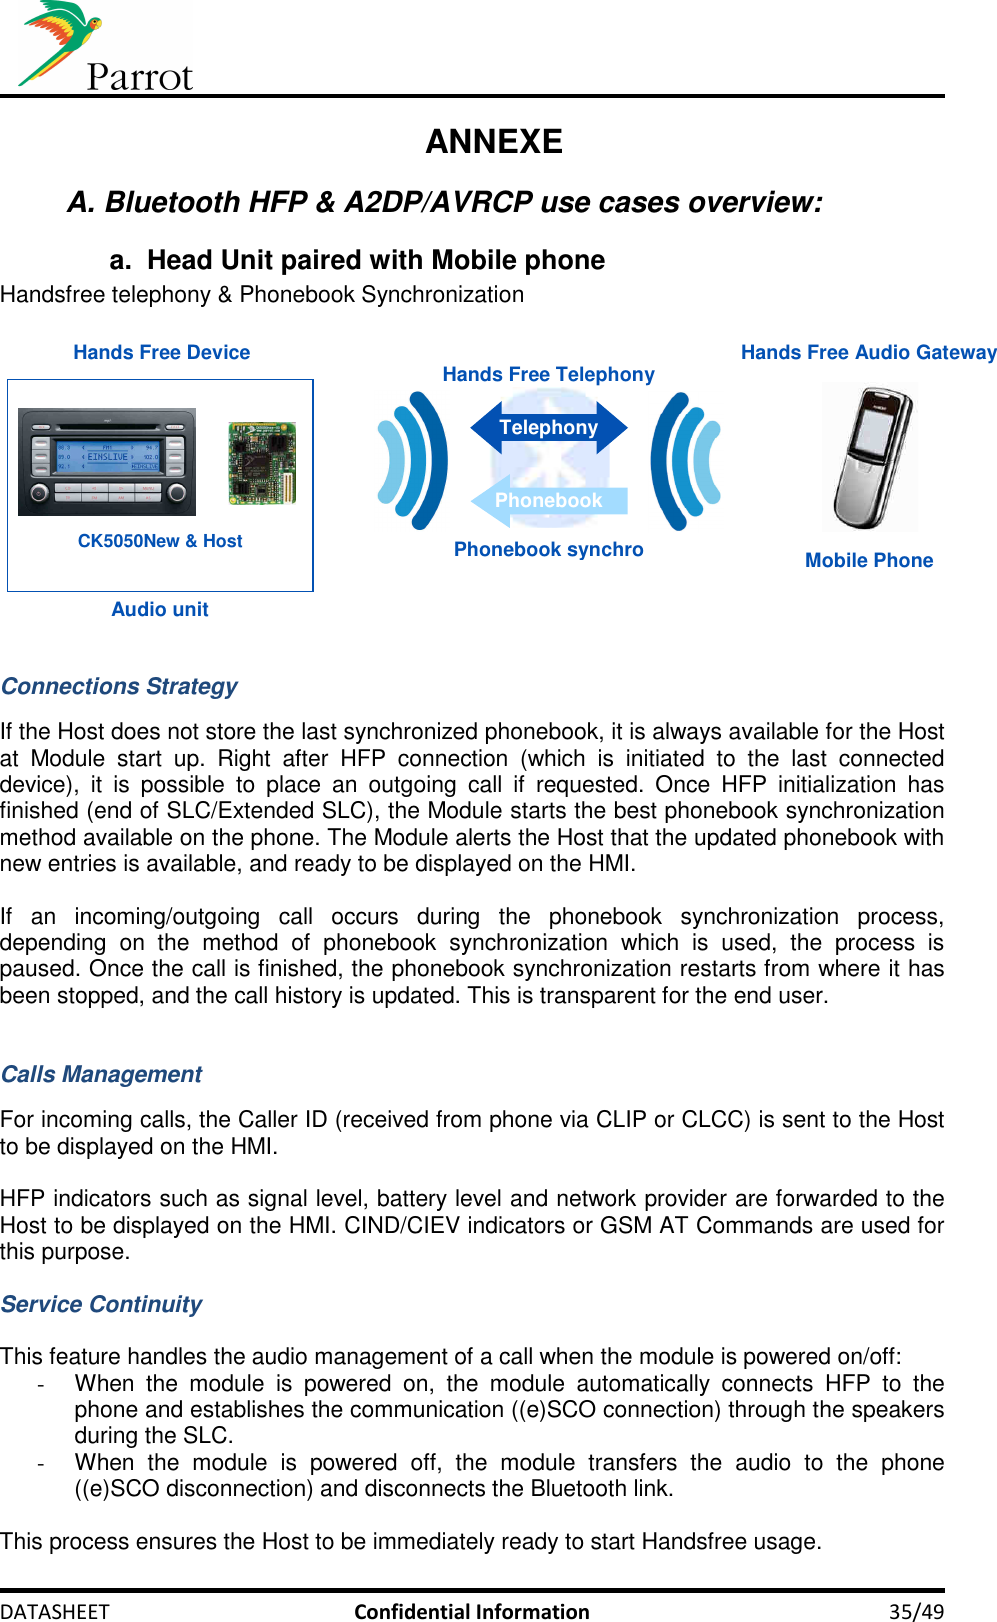     DATASHEET  Confidential Information  35/49 ANNEXE A. Bluetooth HFP &amp; A2DP/AVRCP use cases overview: a.  Head Unit paired with Mobile phone  Handsfree telephony &amp; Phonebook Synchronization   Hands Free Audio Gateway Hands Free DeviceMobile PhoneAudio unitHands Free TelephonyTelephonyPhonebookPhonebook synchroCK5050New &amp; Host   Connections Strategy  If the Host does not store the last synchronized phonebook, it is always available for the Host at  Module  start  up.  Right  after  HFP  connection  (which  is  initiated  to  the  last  connected device),  it  is  possible  to  place  an  outgoing  call  if  requested.  Once  HFP  initialization  has finished (end of SLC/Extended SLC), the Module starts the best phonebook synchronization method available on the phone. The Module alerts the Host that the updated phonebook with new entries is available, and ready to be displayed on the HMI.  If  an  incoming/outgoing  call  occurs  during  the  phonebook  synchronization  process, depending  on  the  method  of  phonebook  synchronization  which  is  used,  the  process  is paused. Once the call is finished, the phonebook synchronization restarts from where it has been stopped, and the call history is updated. This is transparent for the end user.   Calls Management  For incoming calls, the Caller ID (received from phone via CLIP or CLCC) is sent to the Host to be displayed on the HMI.  HFP indicators such as signal level, battery level and network provider are forwarded to the Host to be displayed on the HMI. CIND/CIEV indicators or GSM AT Commands are used for this purpose.  Service Continuity  This feature handles the audio management of a call when the module is powered on/off: -  When  the  module  is  powered  on,  the  module  automatically  connects  HFP  to  the phone and establishes the communication ((e)SCO connection) through the speakers during the SLC. -  When  the  module  is  powered  off,  the  module  transfers  the  audio  to  the  phone ((e)SCO disconnection) and disconnects the Bluetooth link.  This process ensures the Host to be immediately ready to start Handsfree usage.  